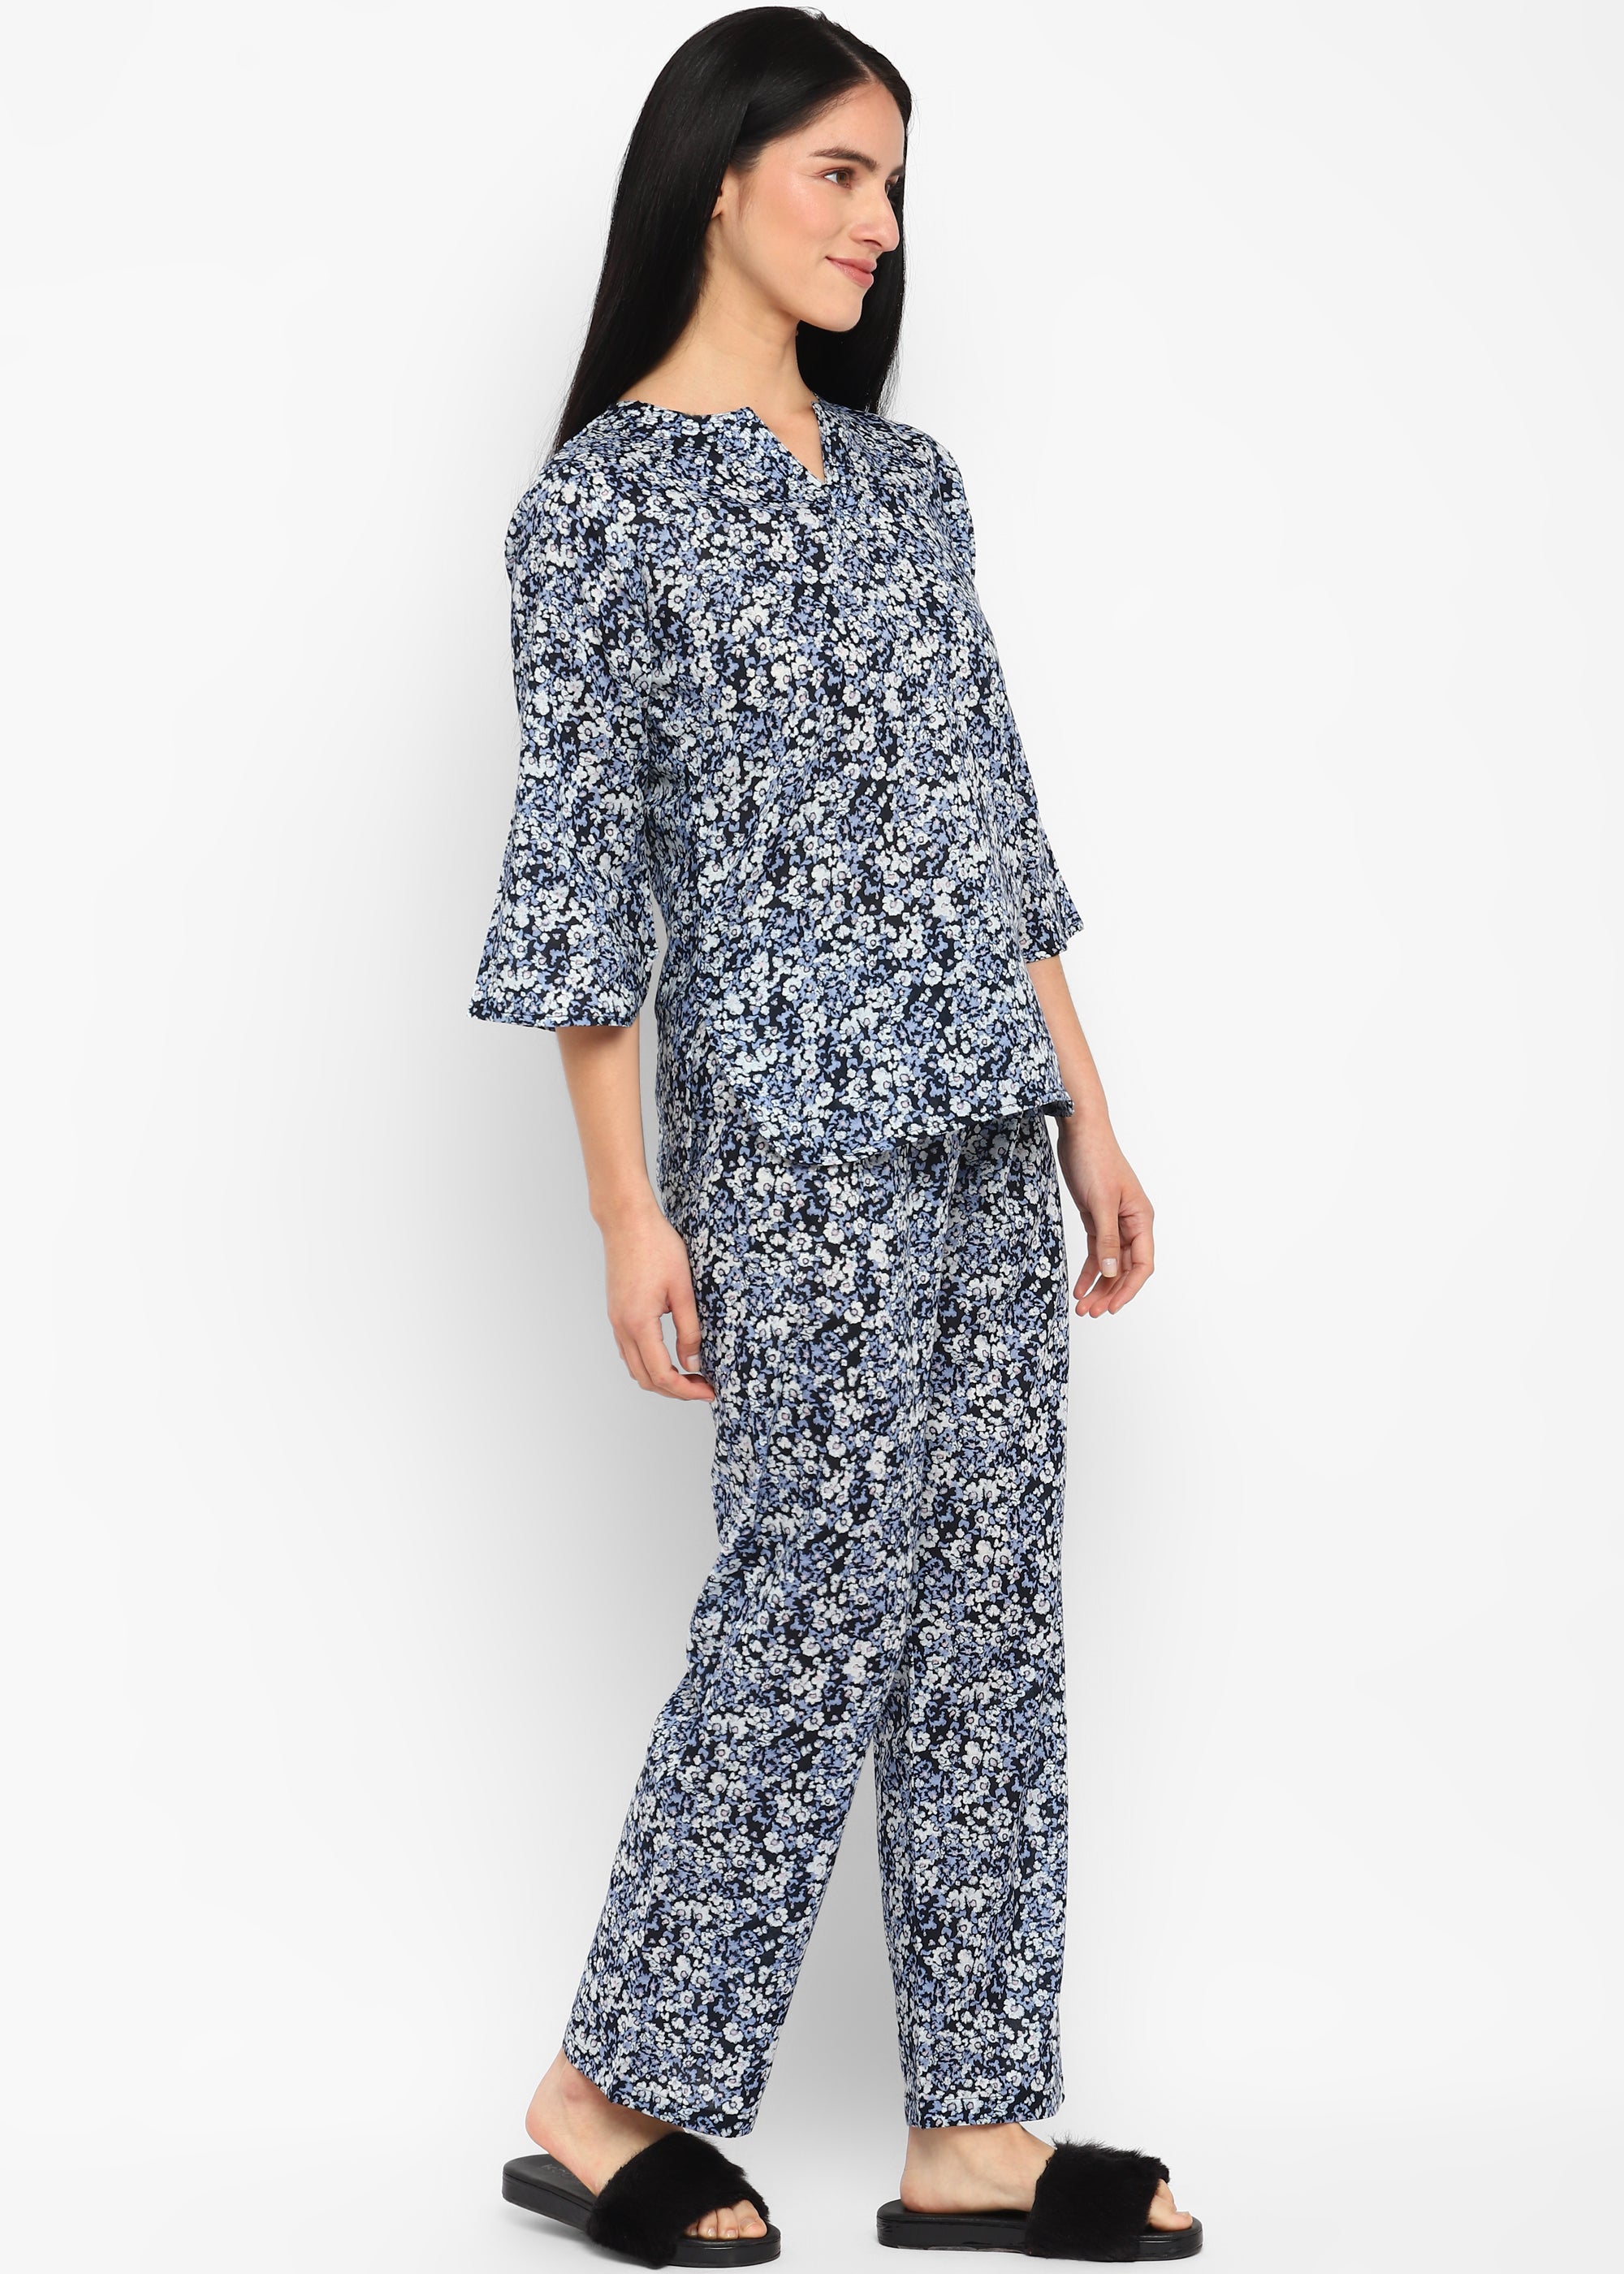 Abstract Ditsy Blue Flower Print V Neck 3/4th Sleeve Women's Night suit - Shopbloom